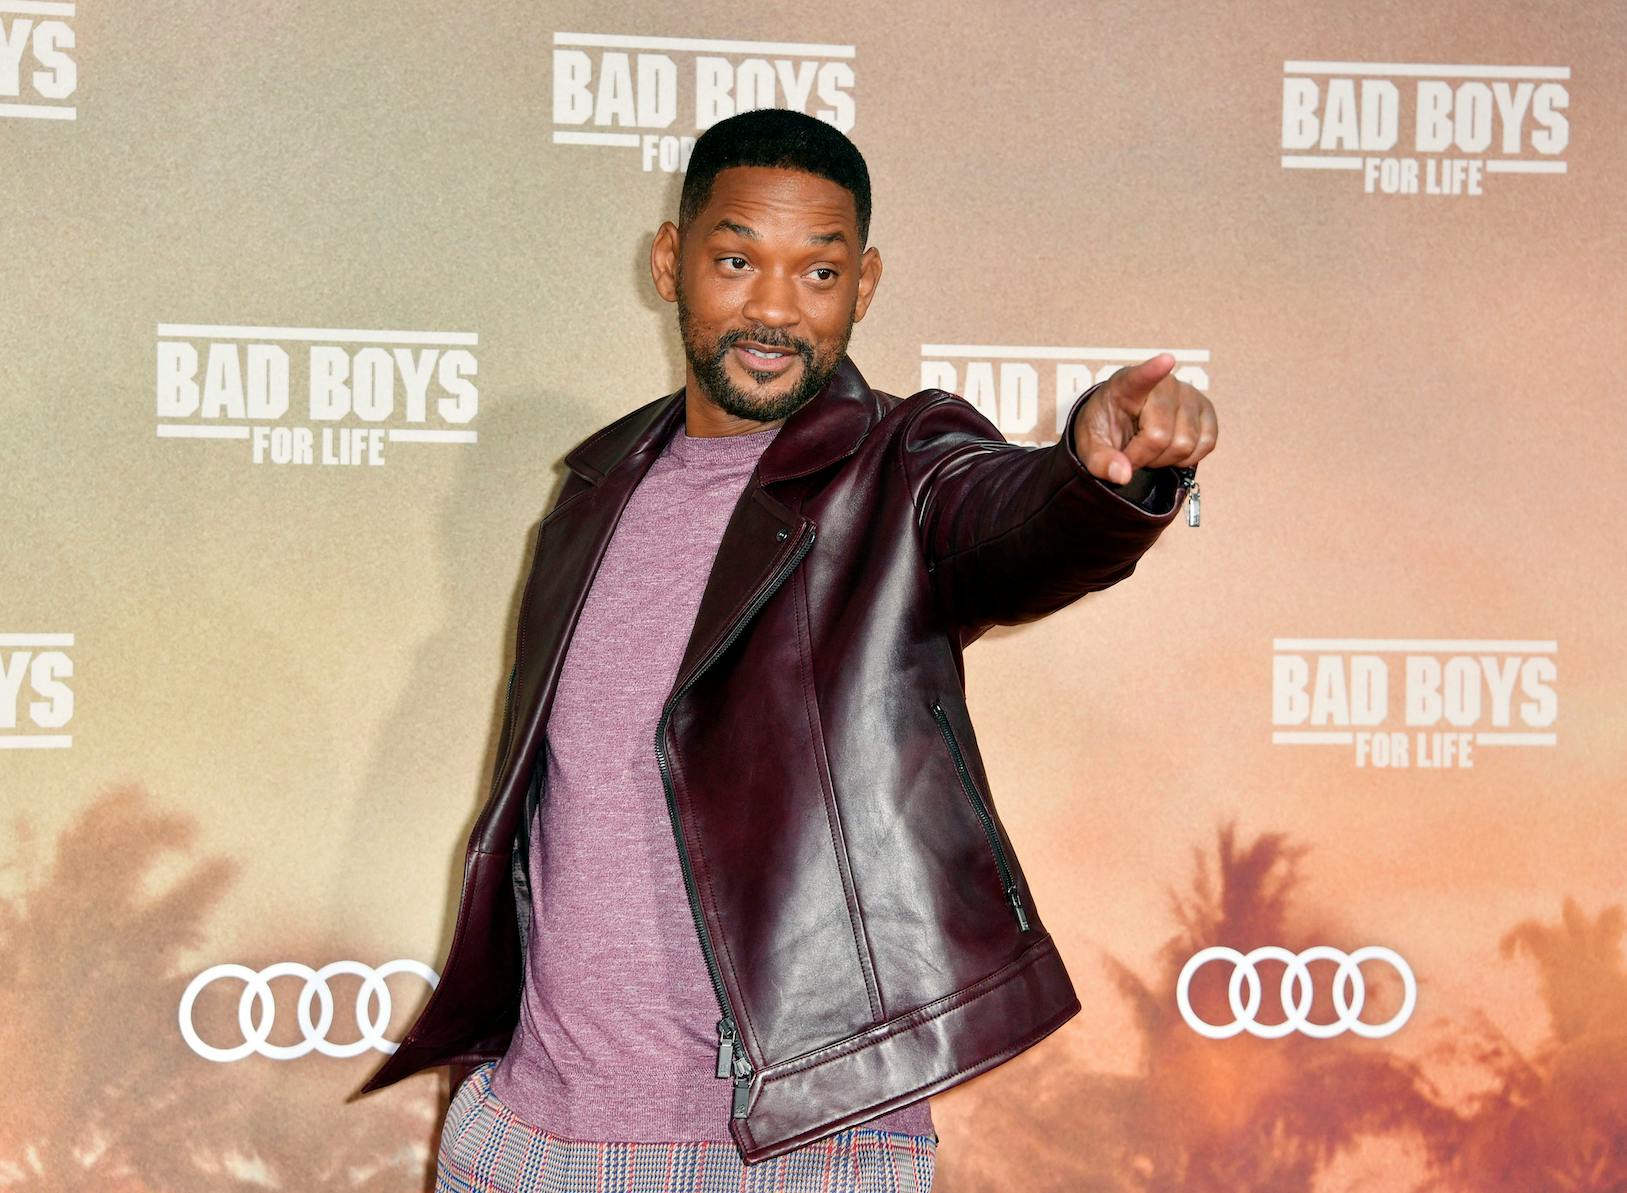 https://imgix.seoghoer.dk/media/article/will-smith.png